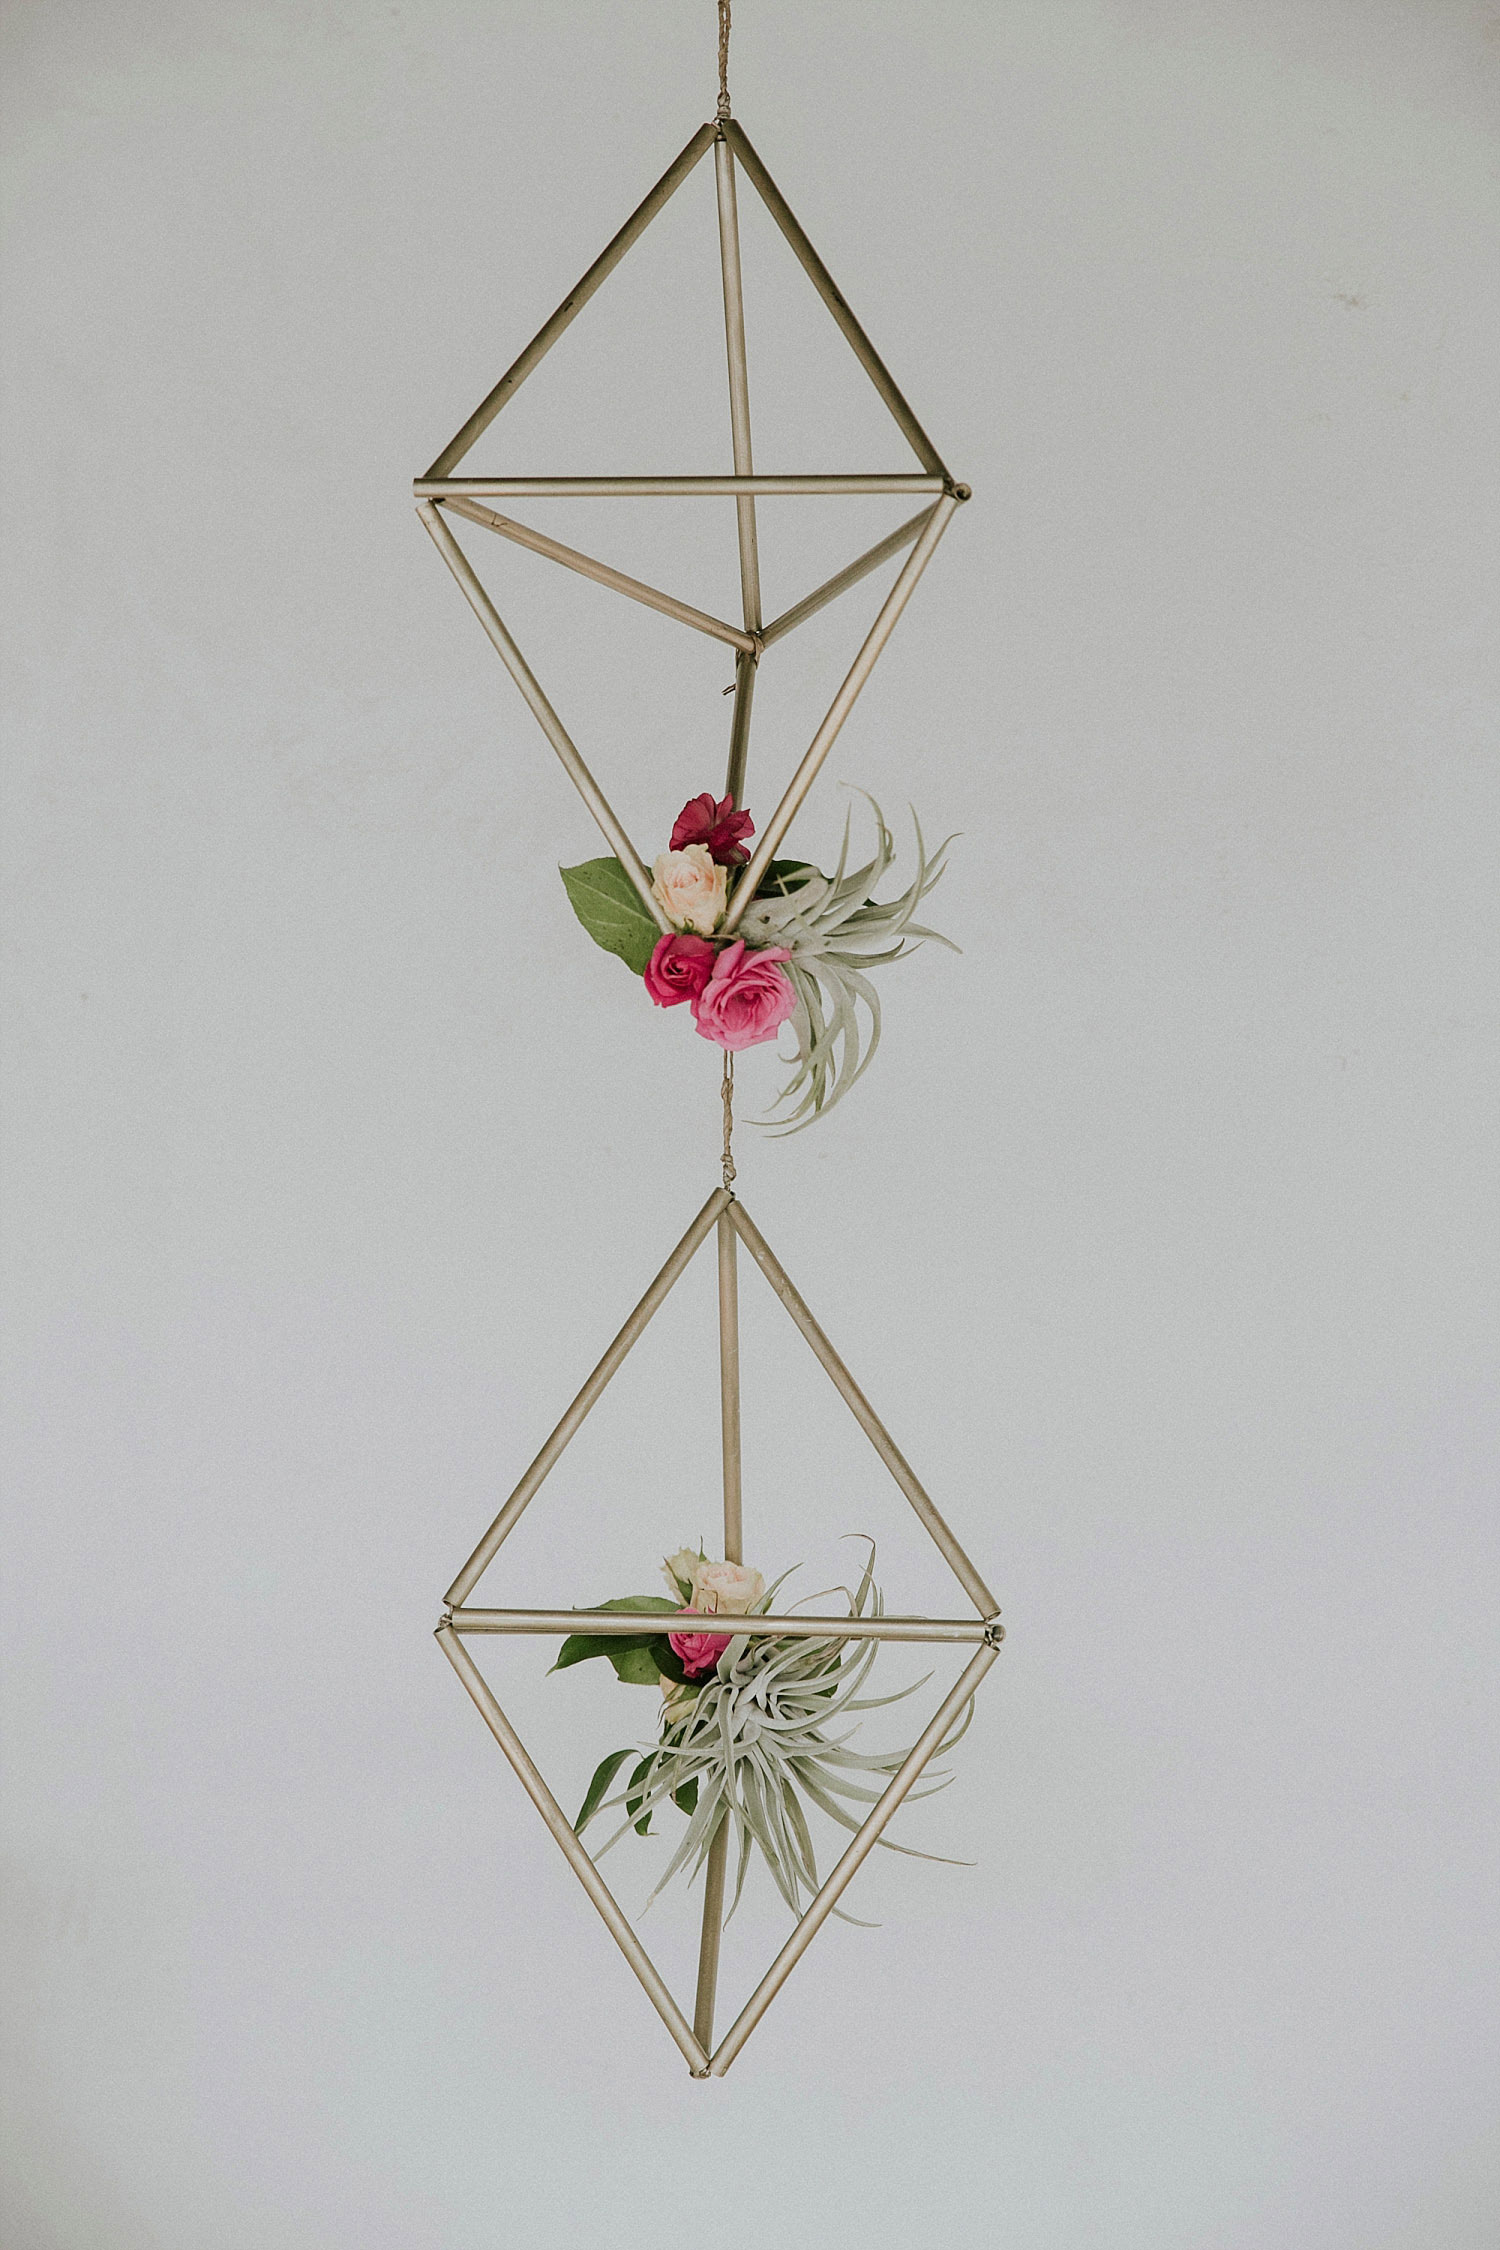 hanging geometric shapes with flowers